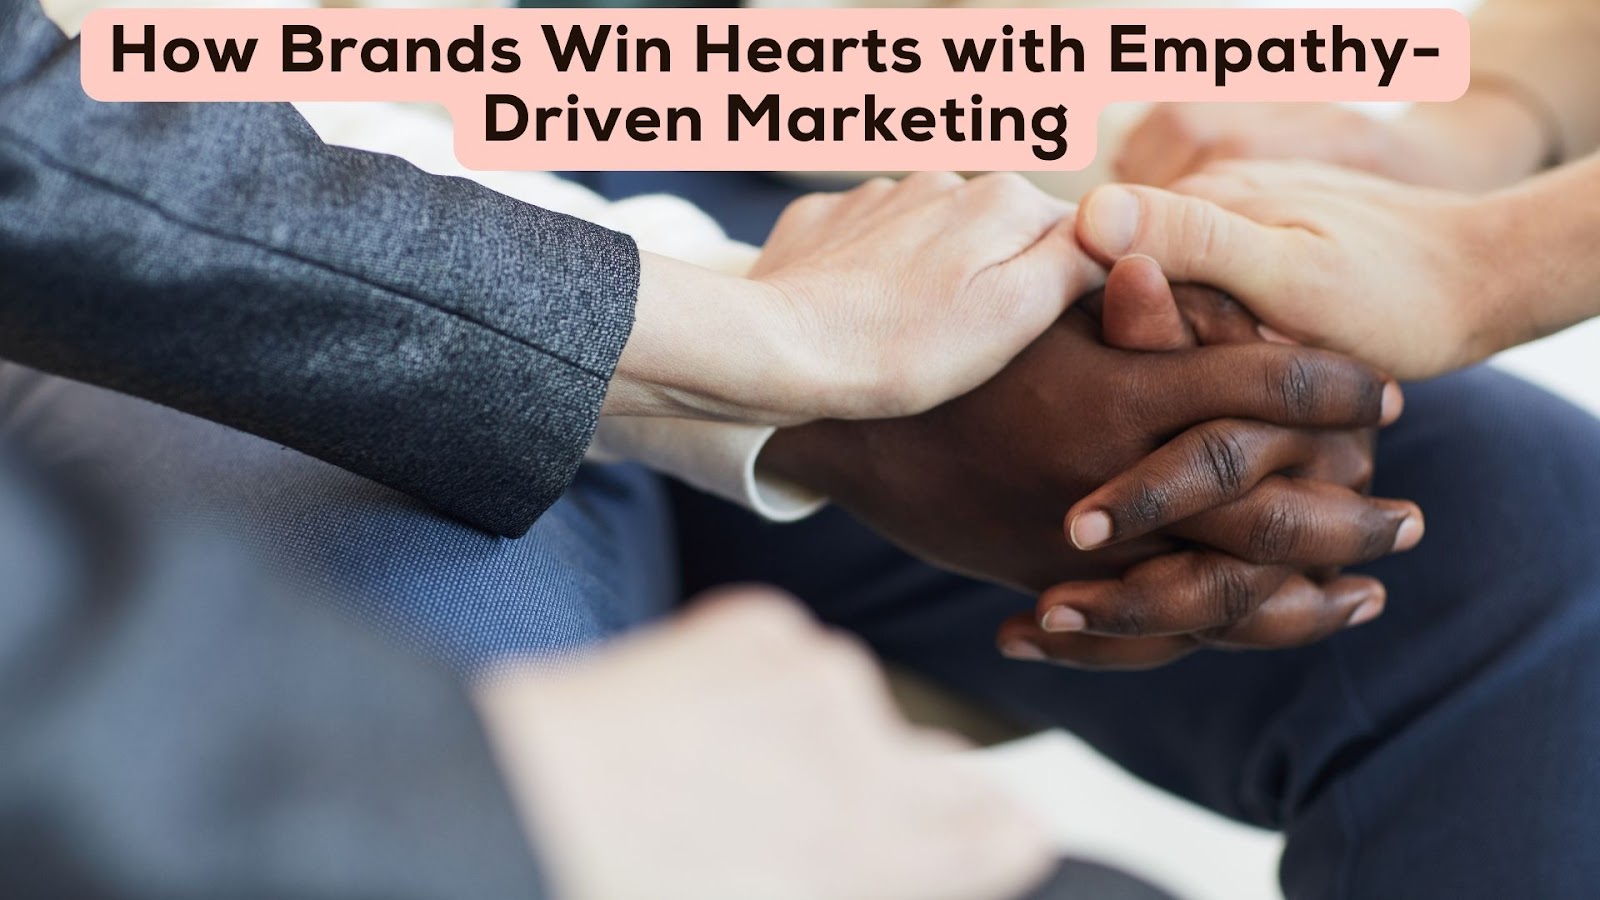 How Brands Win Hearts with Empathy-Driven Marketing